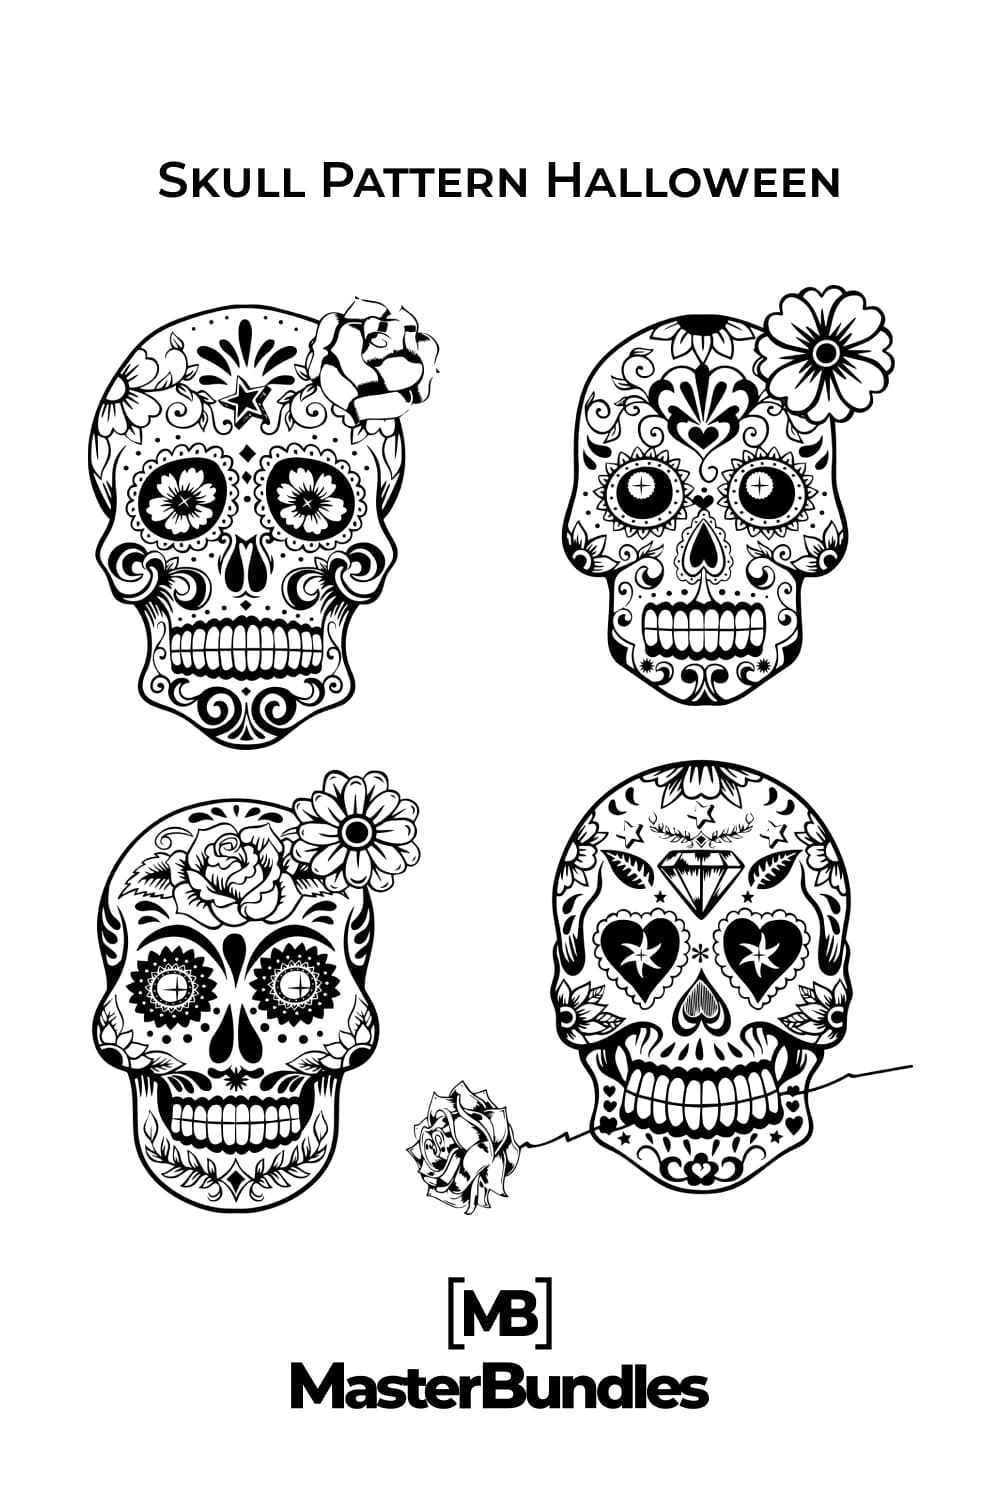 Black and white skulls with flowers ornaments.